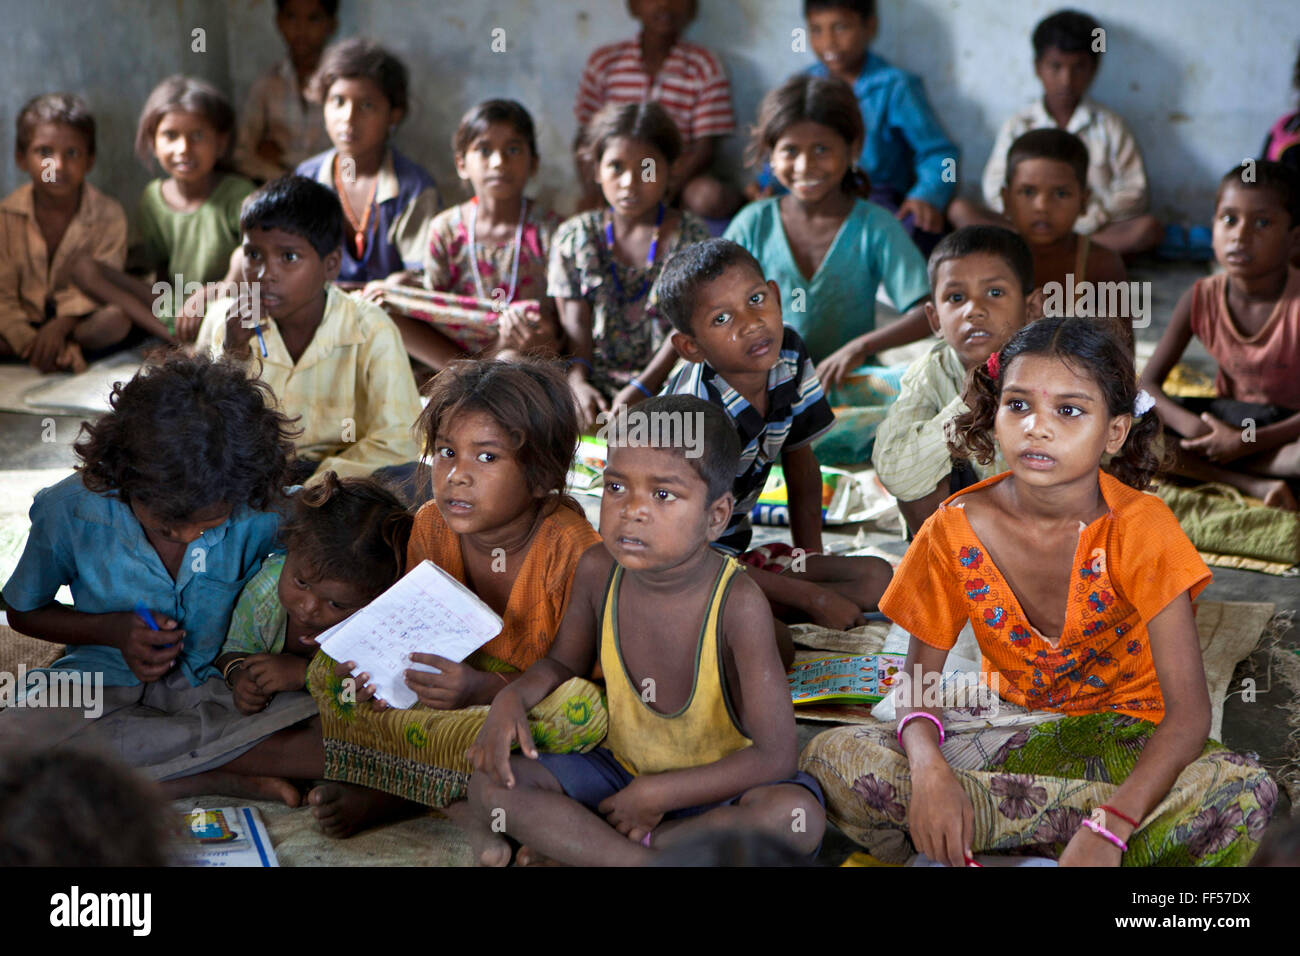 Children from a Dalit community take part in education classes. MSS facilitate programs targeting children of rural communities in the Maharjganj district. Stock Photo